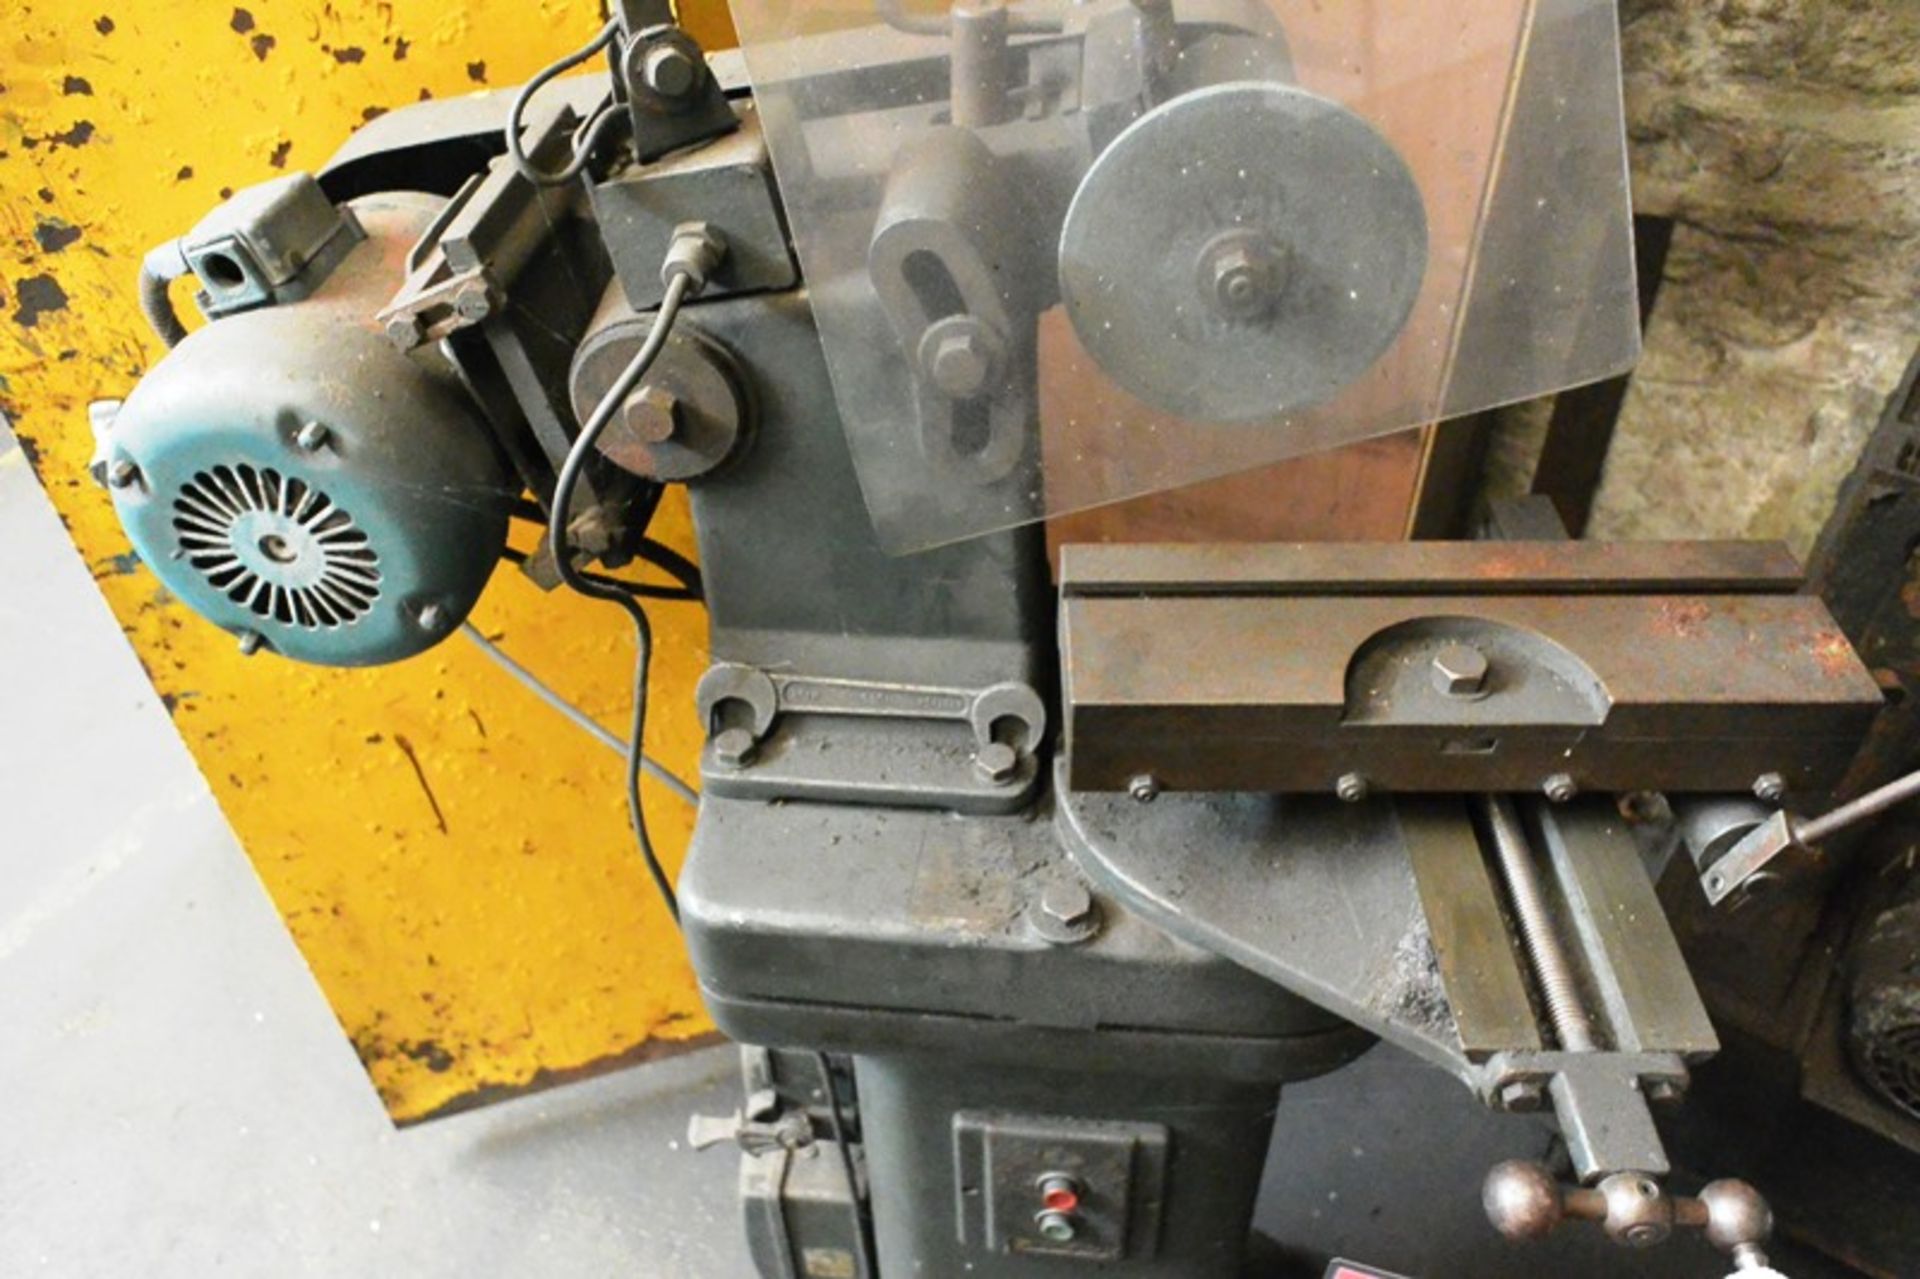 Clarkson tool & cutter grinder, 330" x 110mm table size (Recommended collection period for this lot - Image 3 of 3